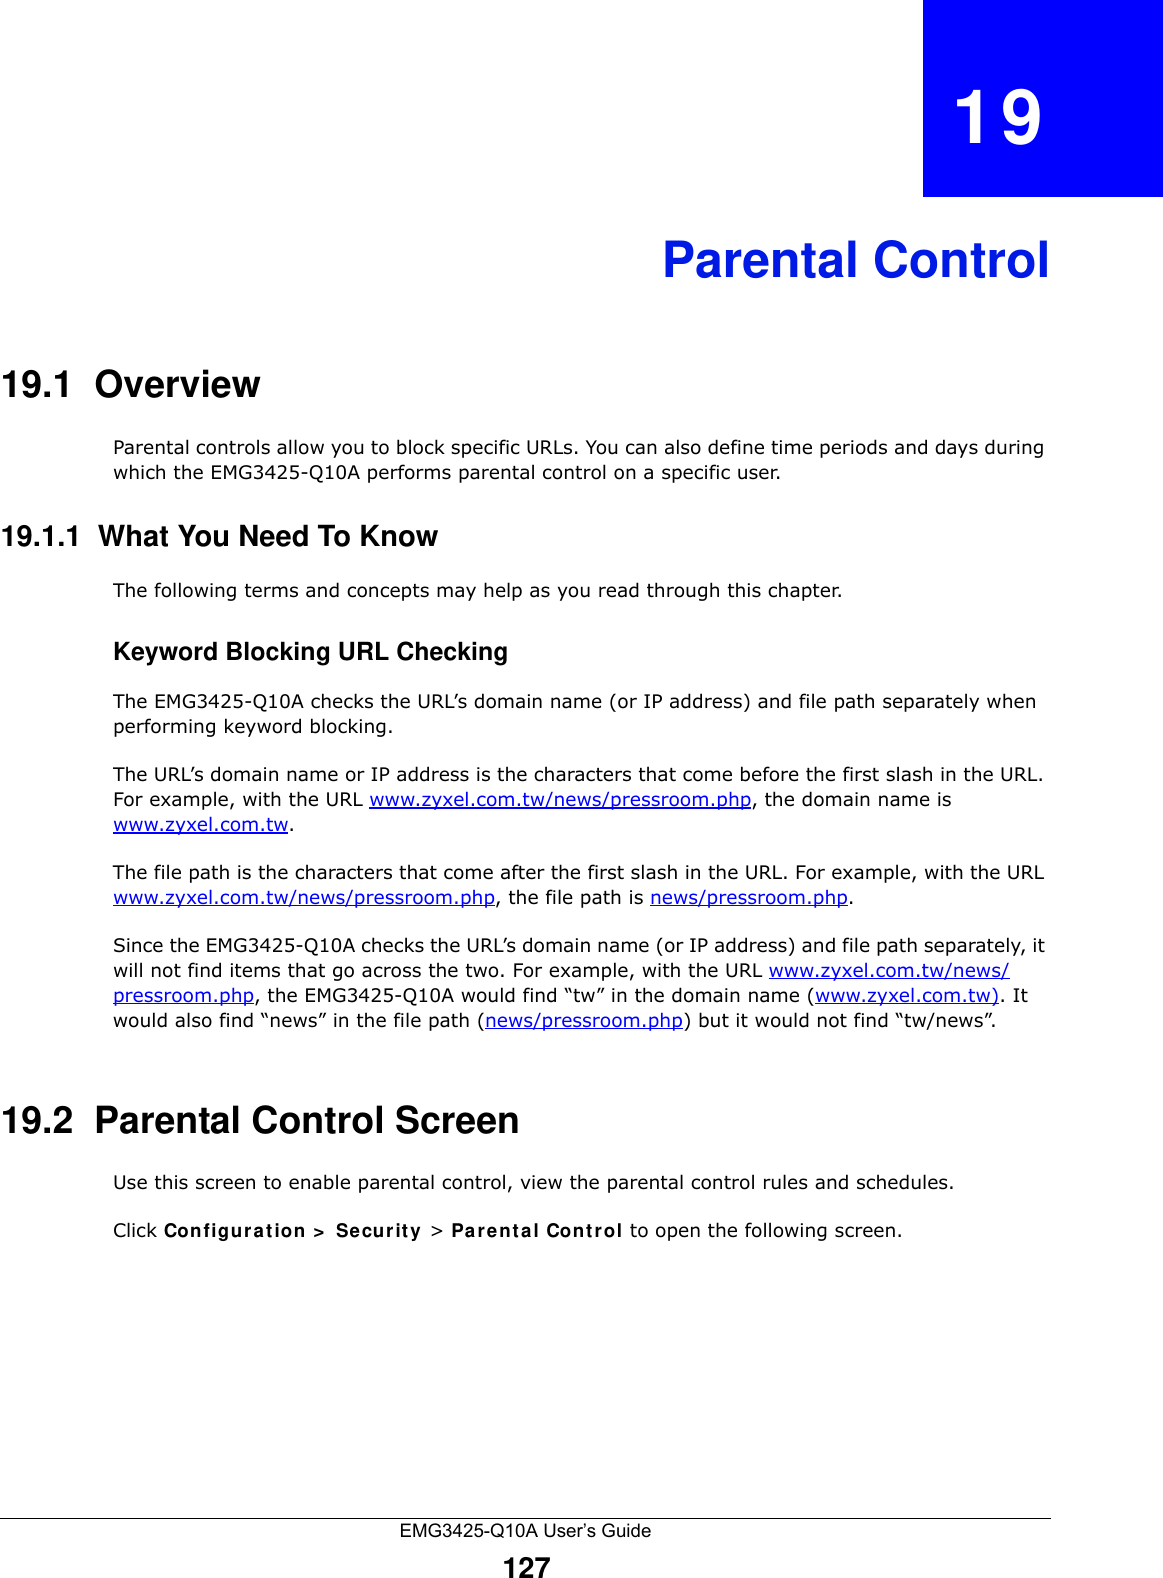 EMG3425-Q10A User’s Guide127CHAPTER   19Parental Control19.1  OverviewParental controls allow you to block specific URLs. You can also define time periods and days during which the EMG3425-Q10A performs parental control on a specific user. 19.1.1  What You Need To KnowThe following terms and concepts may help as you read through this chapter.Keyword Blocking URL CheckingThe EMG3425-Q10A checks the URL’s domain name (or IP address) and file path separately when performing keyword blocking. The URL’s domain name or IP address is the characters that come before the first slash in the URL. For example, with the URL www.zyxel.com.tw/news/pressroom.php, the domain name is www.zyxel.com.tw.The file path is the characters that come after the first slash in the URL. For example, with the URL www.zyxel.com.tw/news/pressroom.php, the file path is news/pressroom.php.Since the EMG3425-Q10A checks the URL’s domain name (or IP address) and file path separately, it will not find items that go across the two. For example, with the URL www.zyxel.com.tw/news/pressroom.php, the EMG3425-Q10A would find “tw” in the domain name (www.zyxel.com.tw). It would also find “news” in the file path (news/pressroom.php) but it would not find “tw/news”.19.2  Parental Control ScreenUse this screen to enable parental control, view the parental control rules and schedules.Click Configu r at ion &gt;  Se curit y &gt; Pa rent a l Cont r ol to open the following screen. 